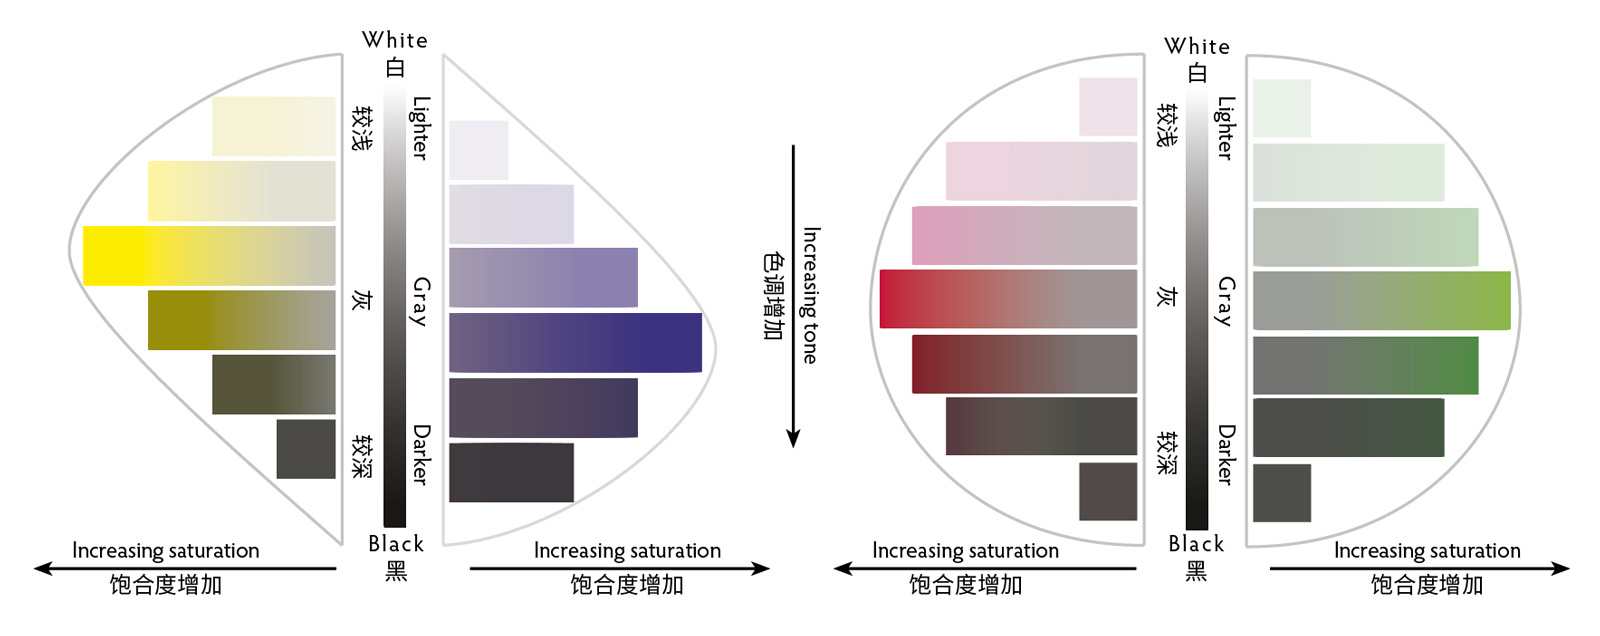 Vertical slices through the color sphere demonstrate the relationship between tone and saturation. Yellow at its highest saturation is lighter in tone than violet, while the highest saturations of red and green are equal in tone.